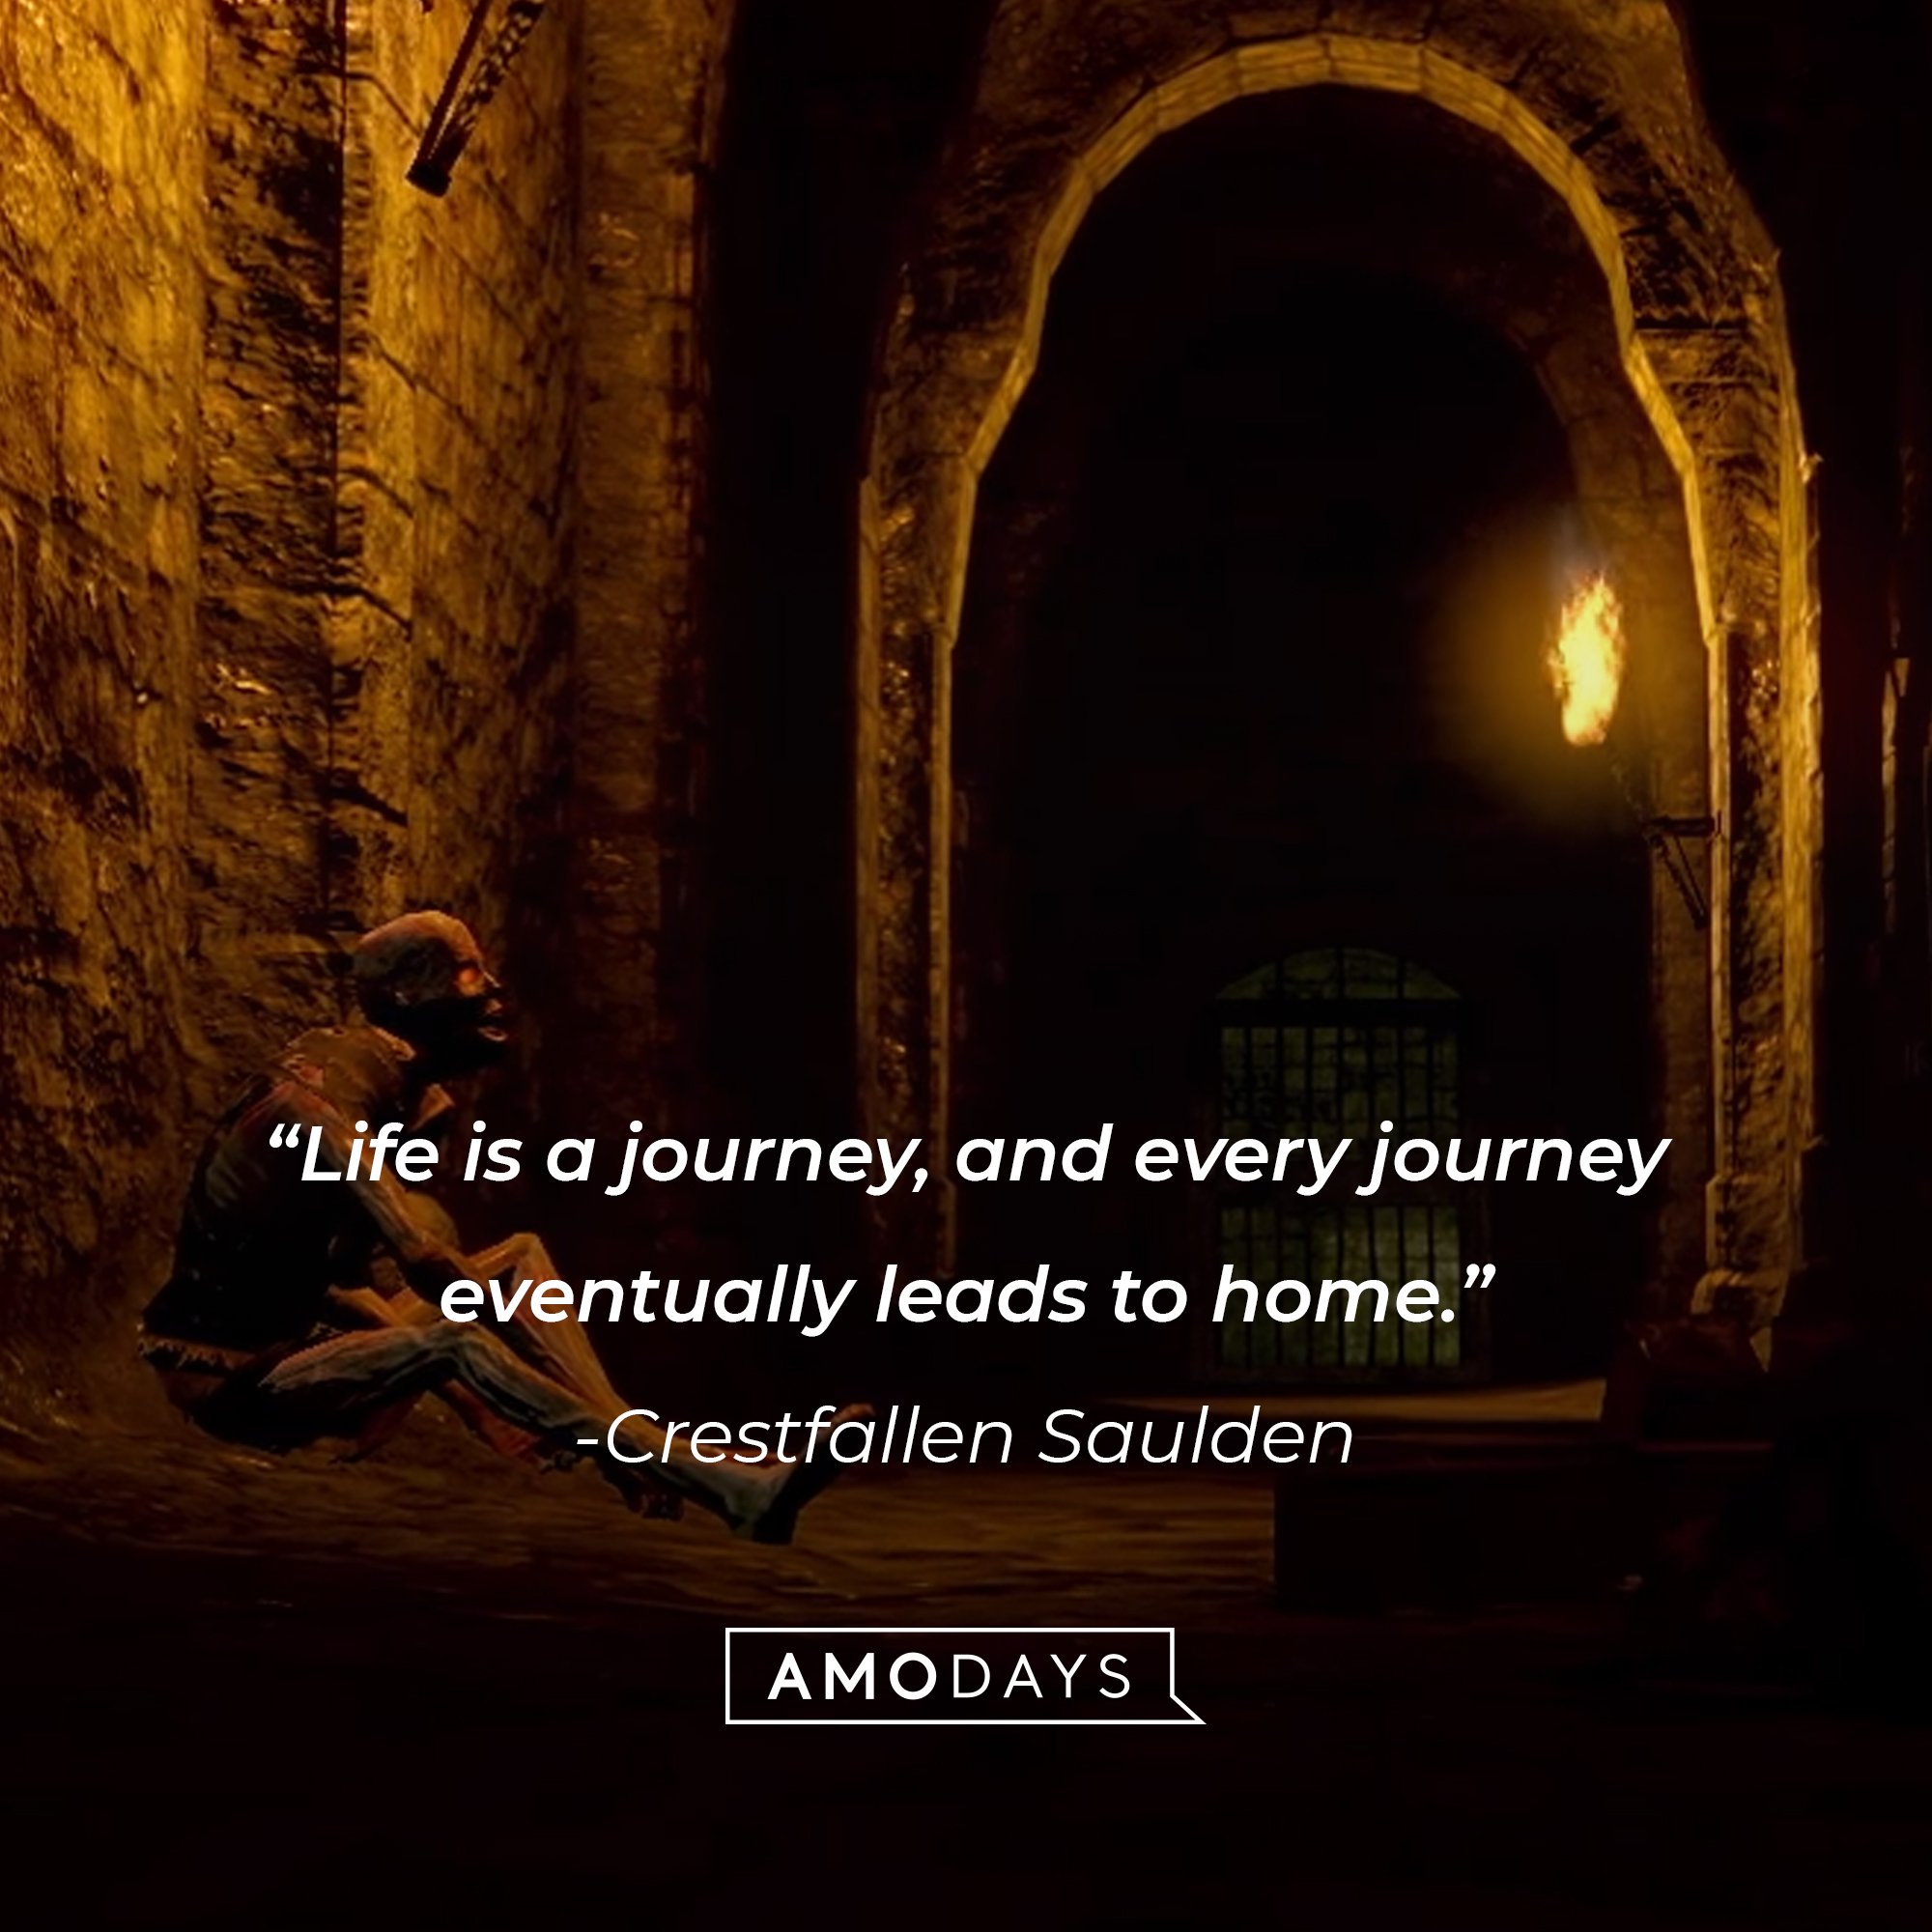  Crestfallen Saulden’s quote: "Life is a journey, and every journey eventually leads to home." | Image: AmoDays